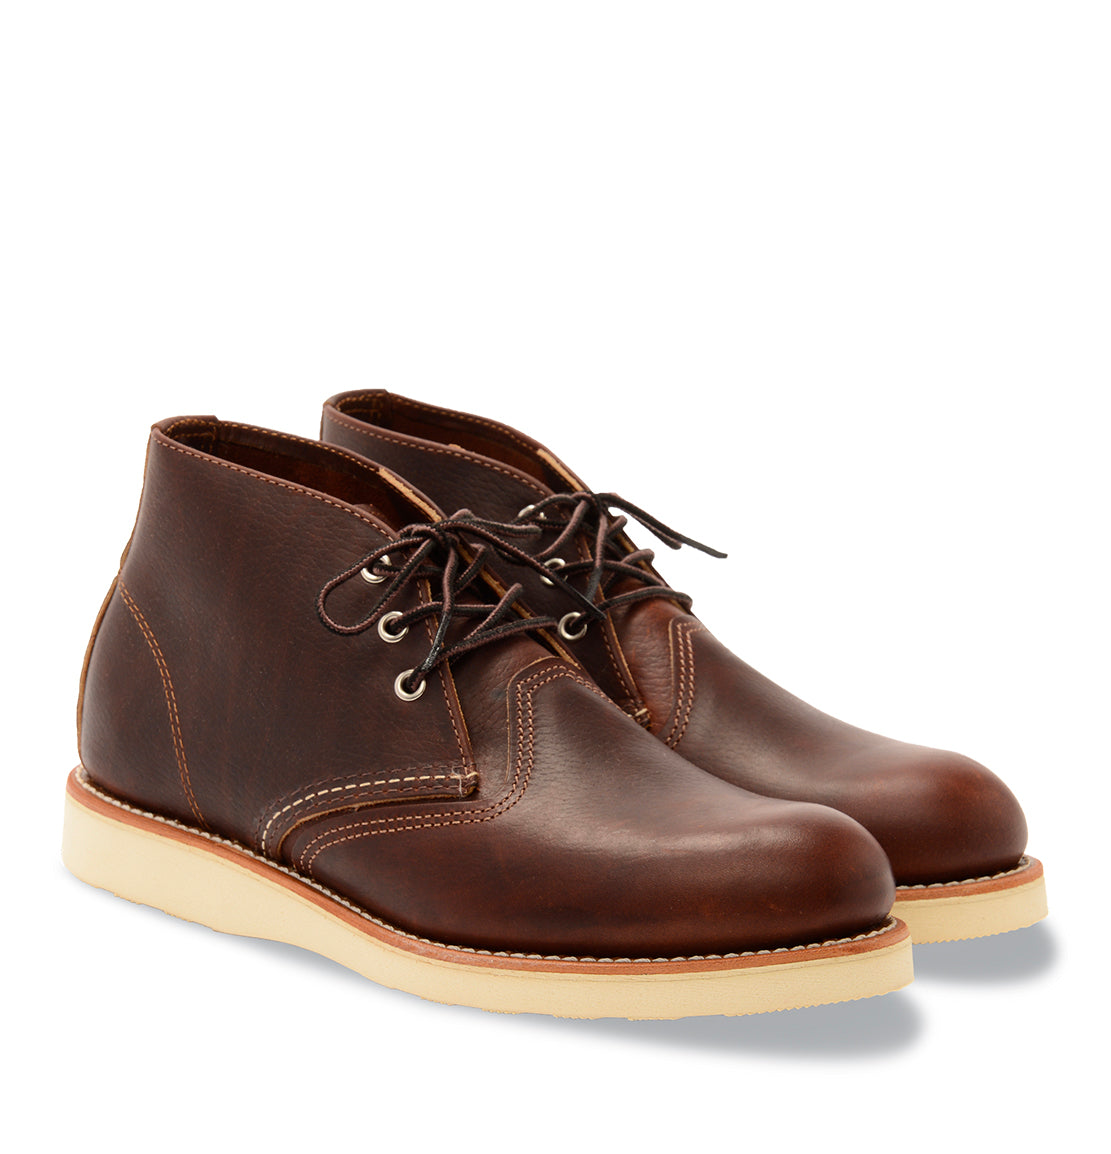 Red wing work chukka boots